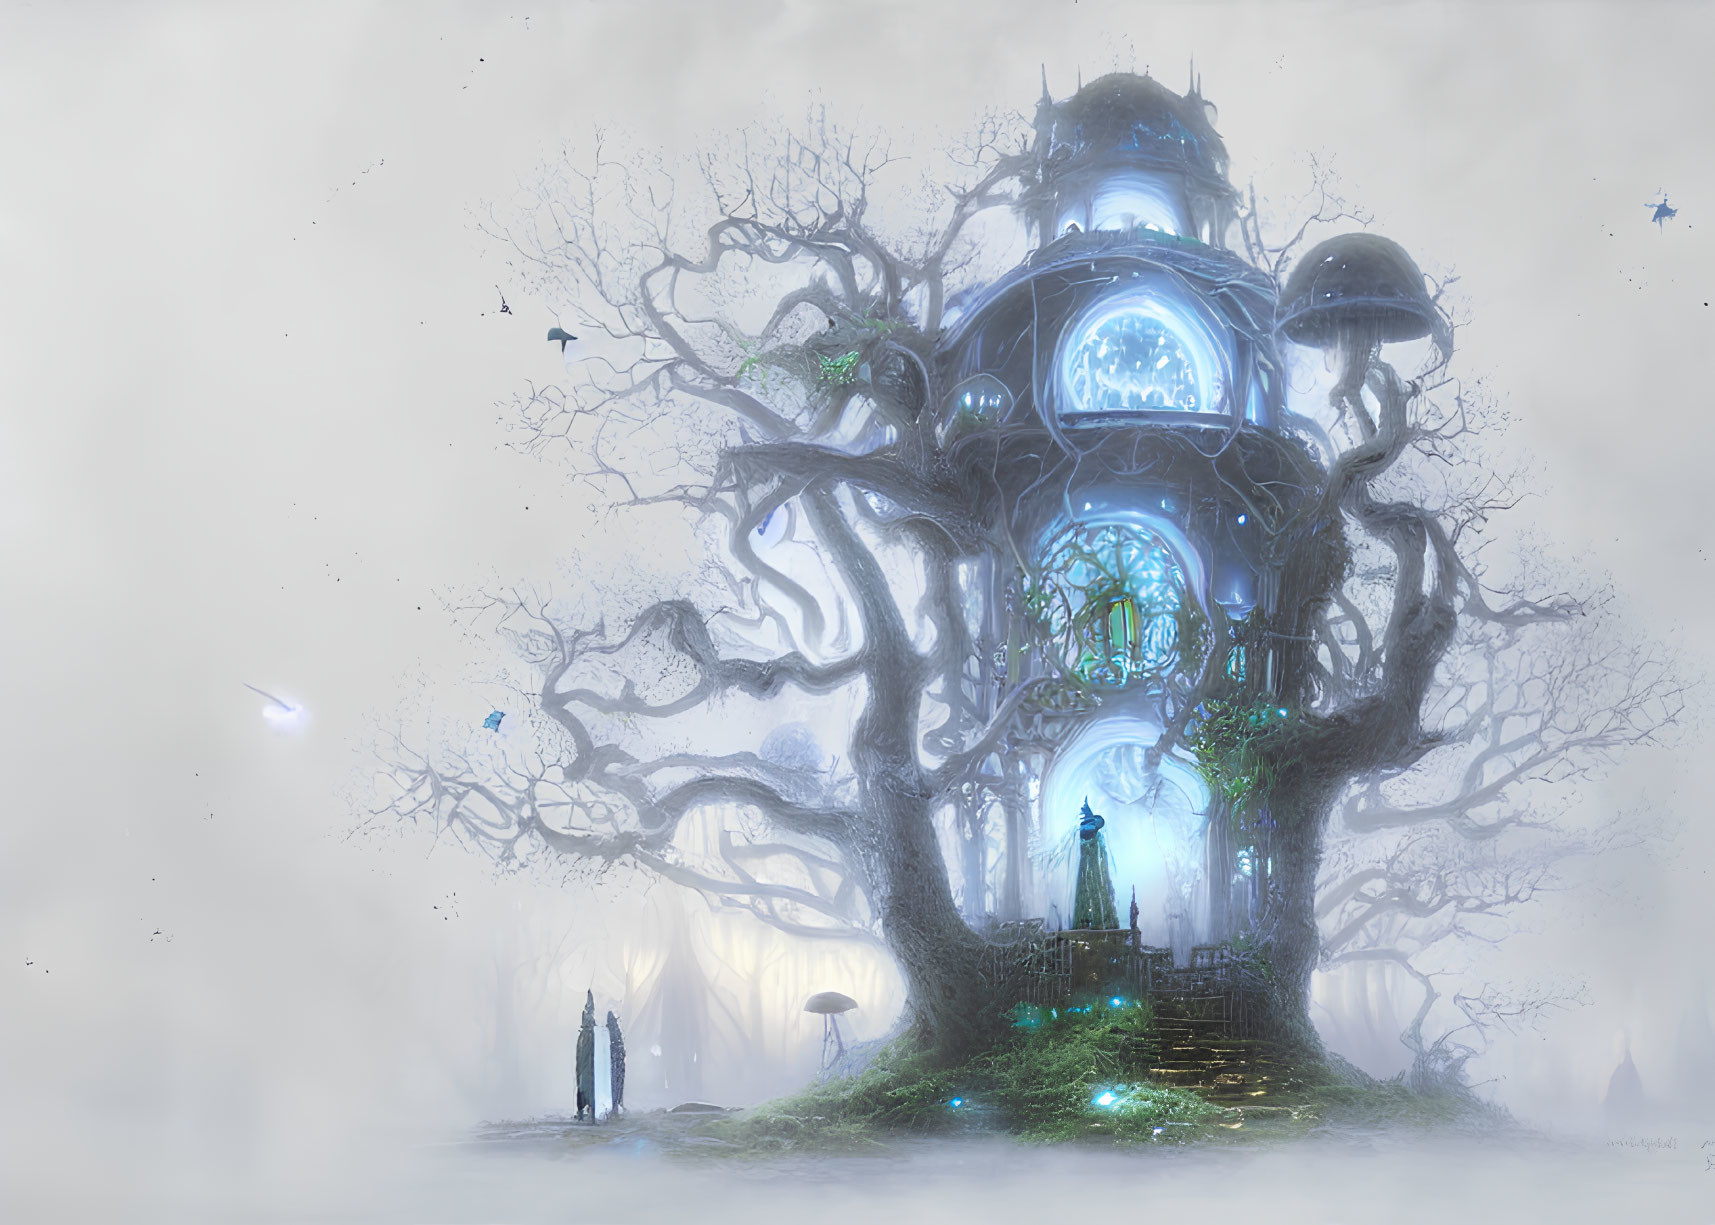 Enchanting treehouse in giant tree with glowing blue windows, mist, figures, and birds